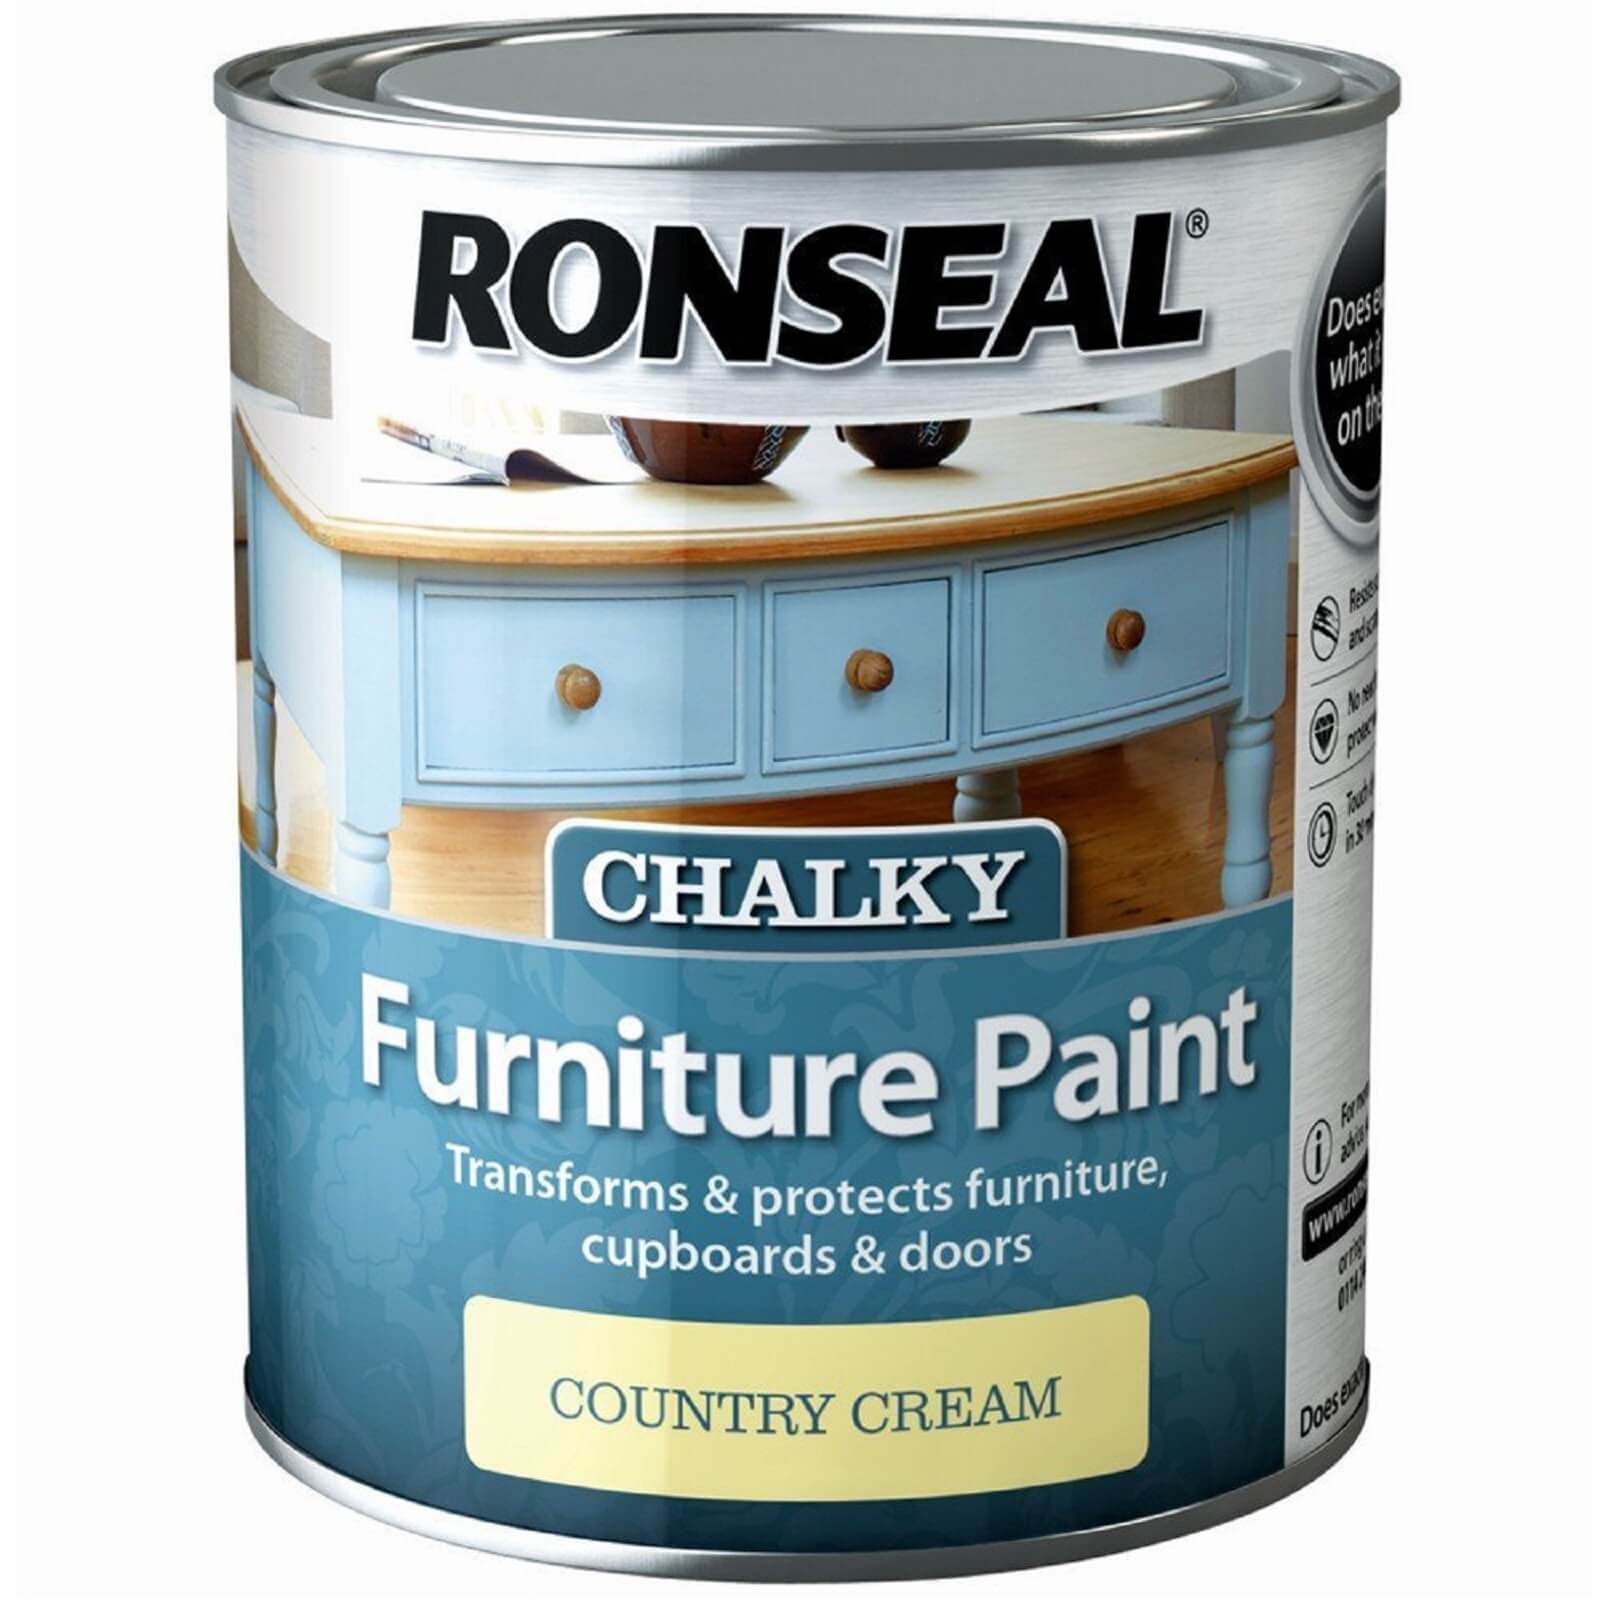 Ronseal Chalk Paint Country Cream - 750ml